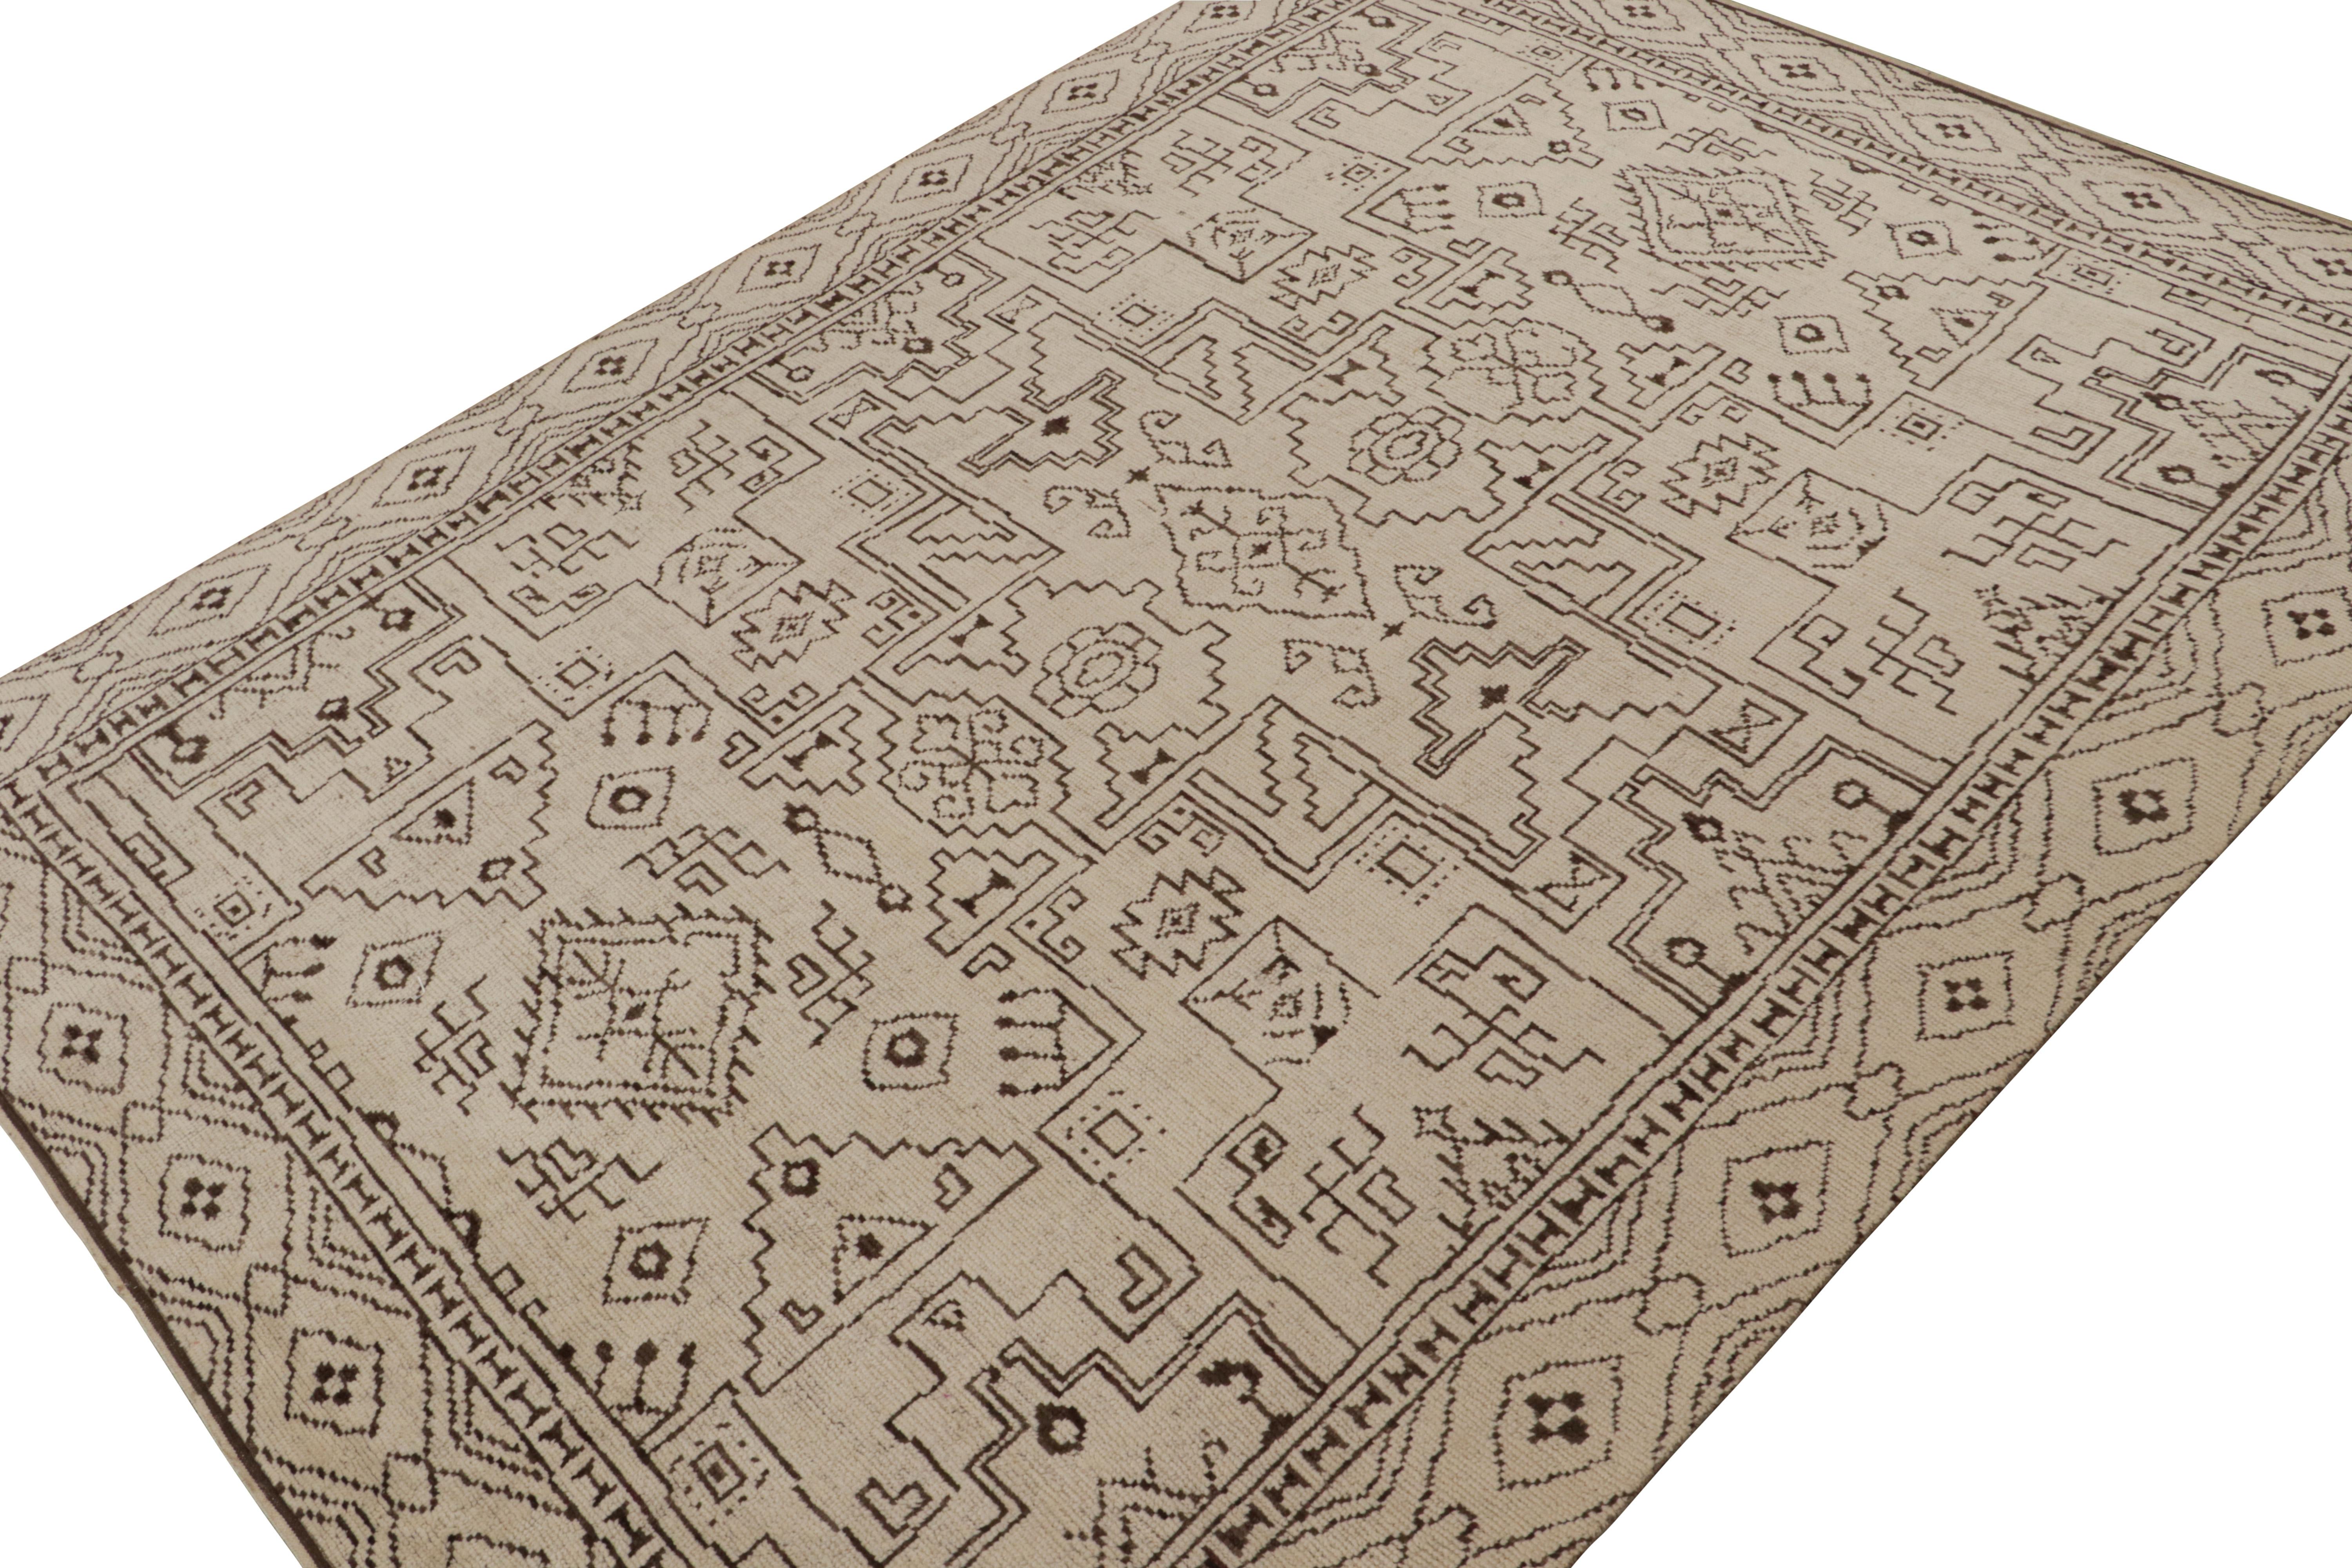 Hand-knotted in wool & cotton, this 10x14 rug is a new addition to the Moroccan Collection by Rug & Kilim. 

On the Design

This large sized rug enjoys a contemporary high-end approach to the Berber tribal rug style and primitivist geometric